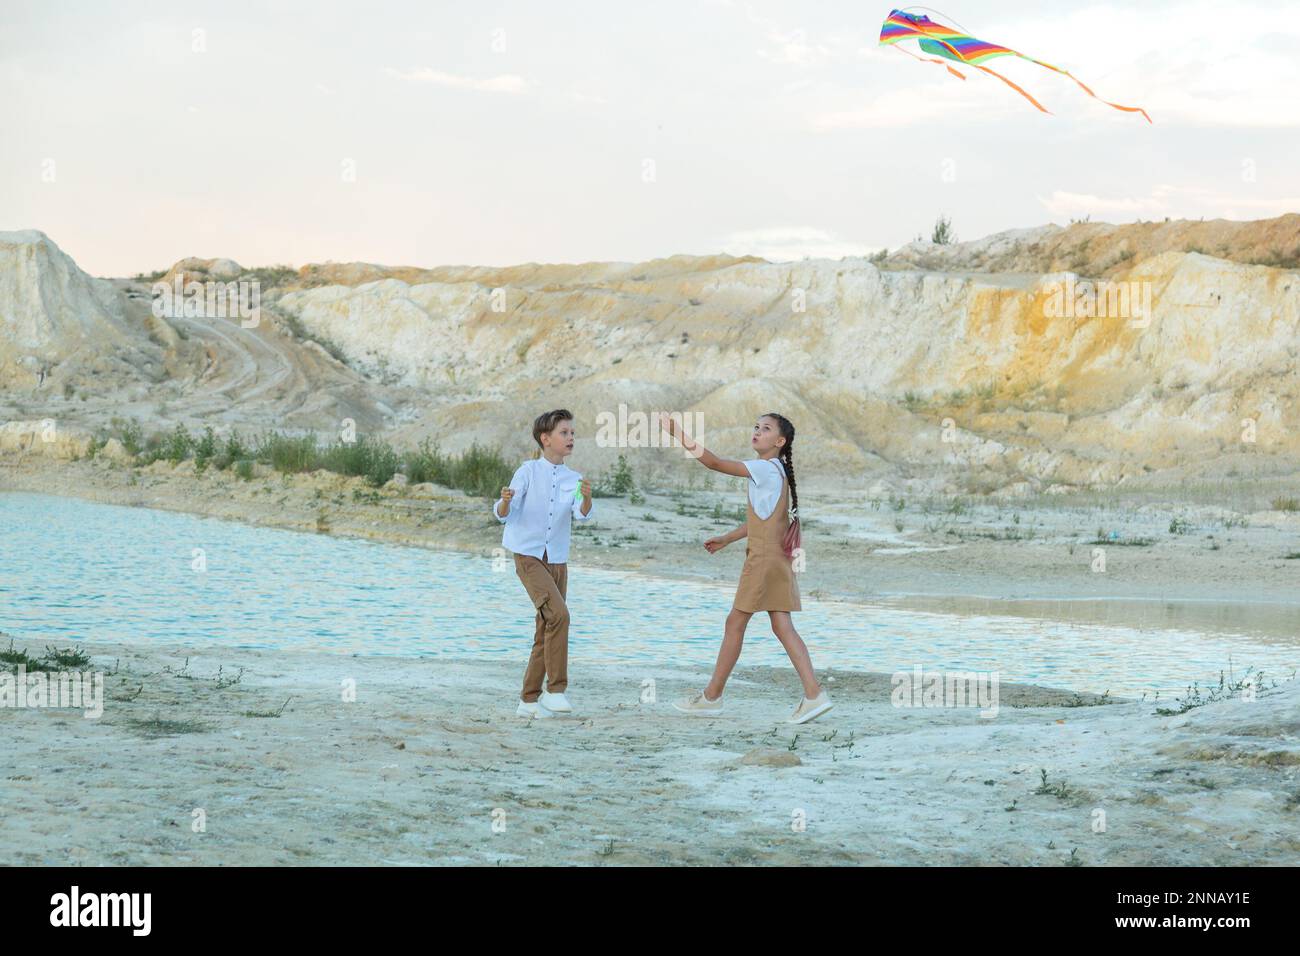 A boy and a girl launch bright kite standing on the edge of a mountain near pond. Stock Photo